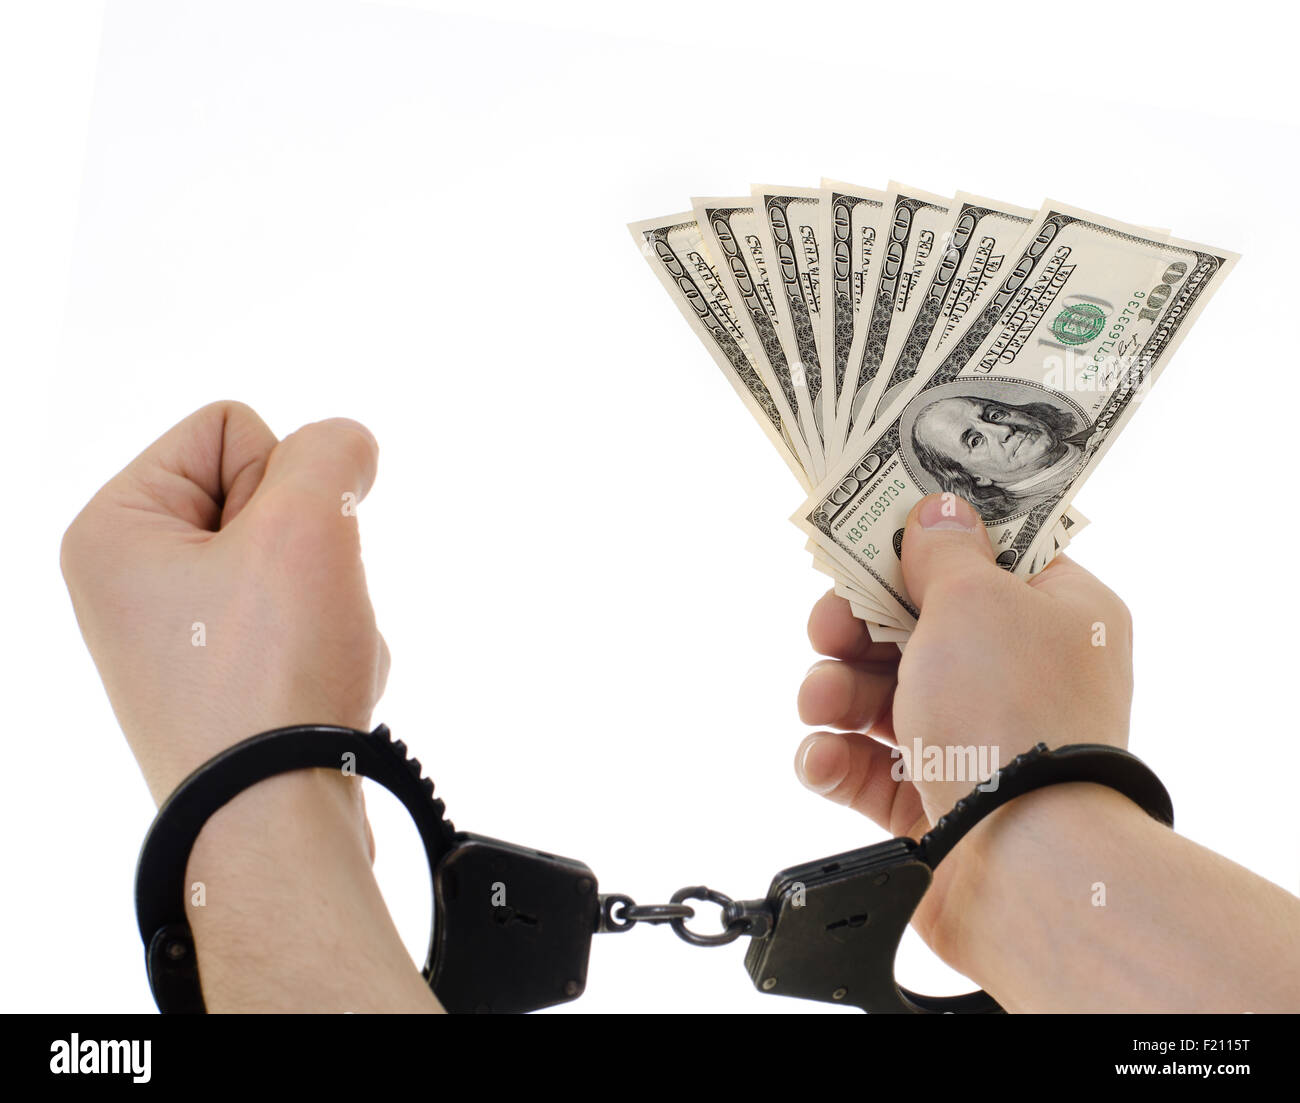 hand in shackle hold  currency note dollars, on white background, isolated Stock Photo